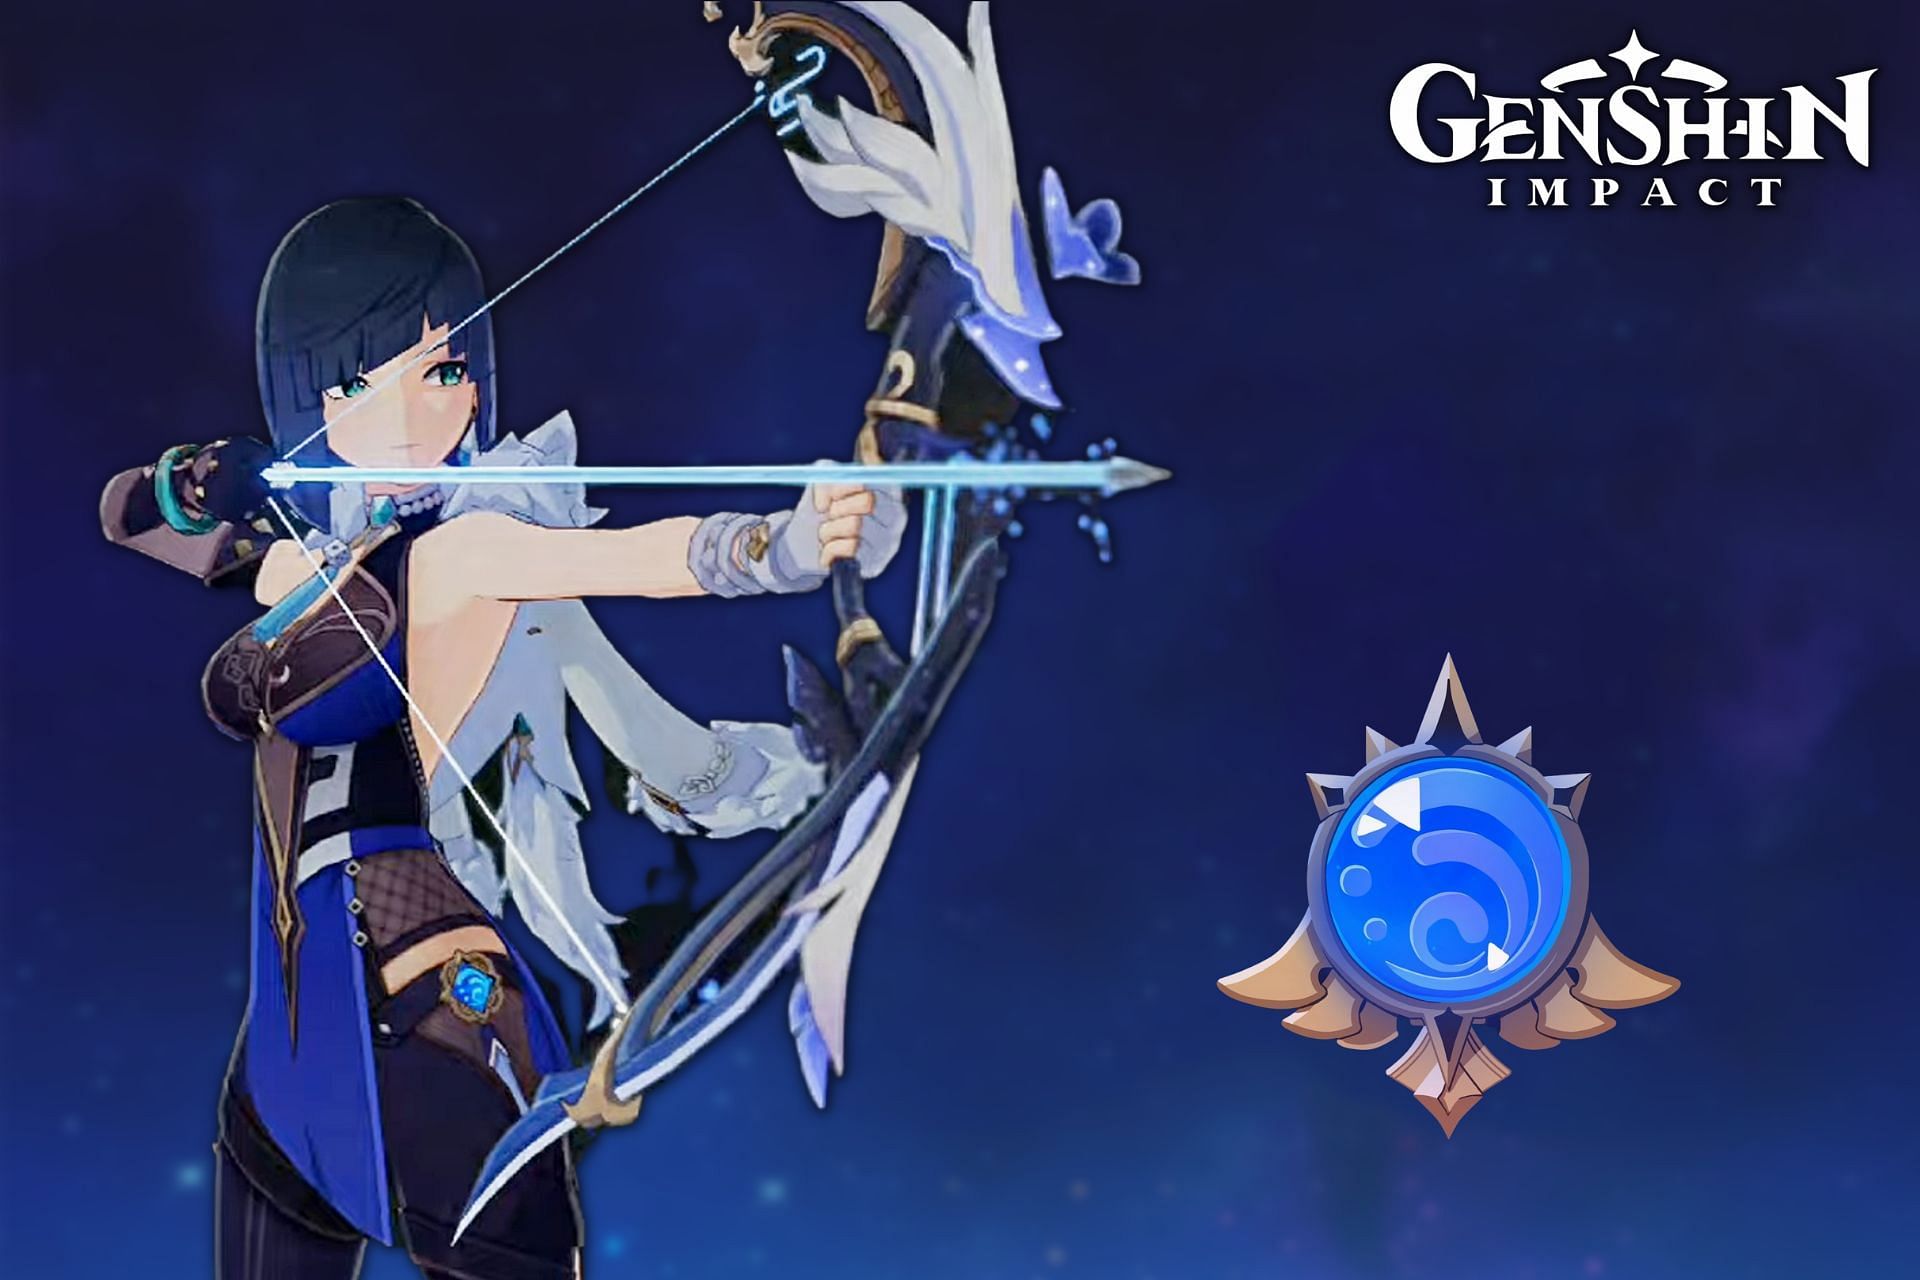 Genshin Impact Leaks Reveal Yelan As 2nd Hydro Bow Character Expected